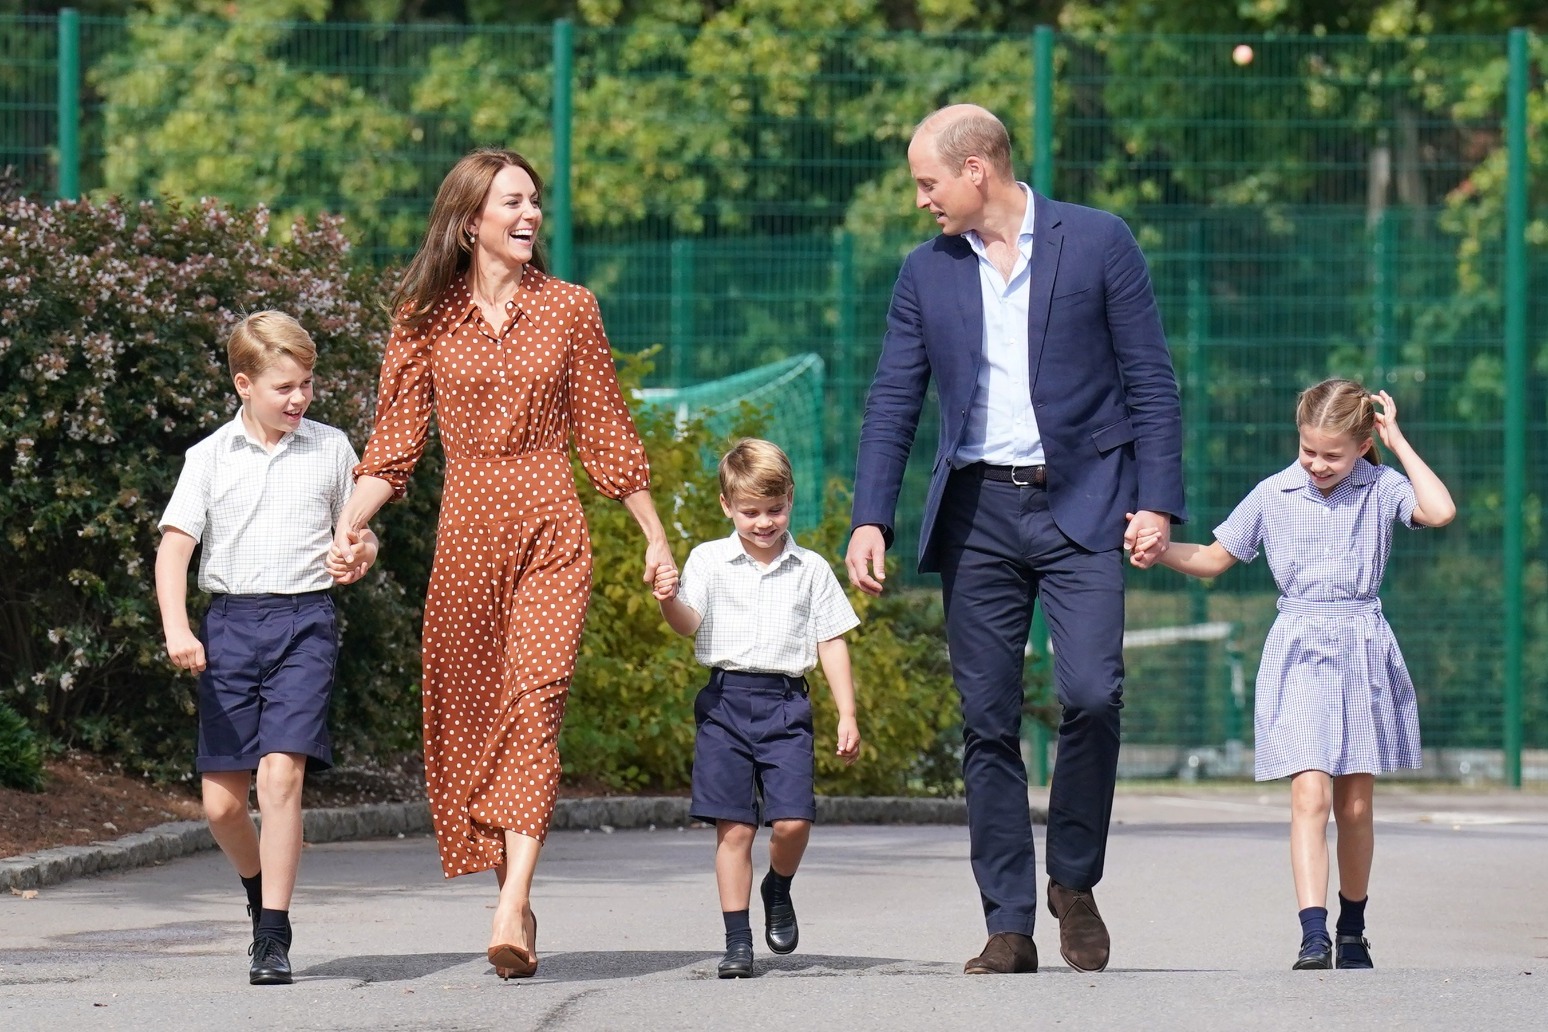 Kate praised for telling children of cancer diagnosis